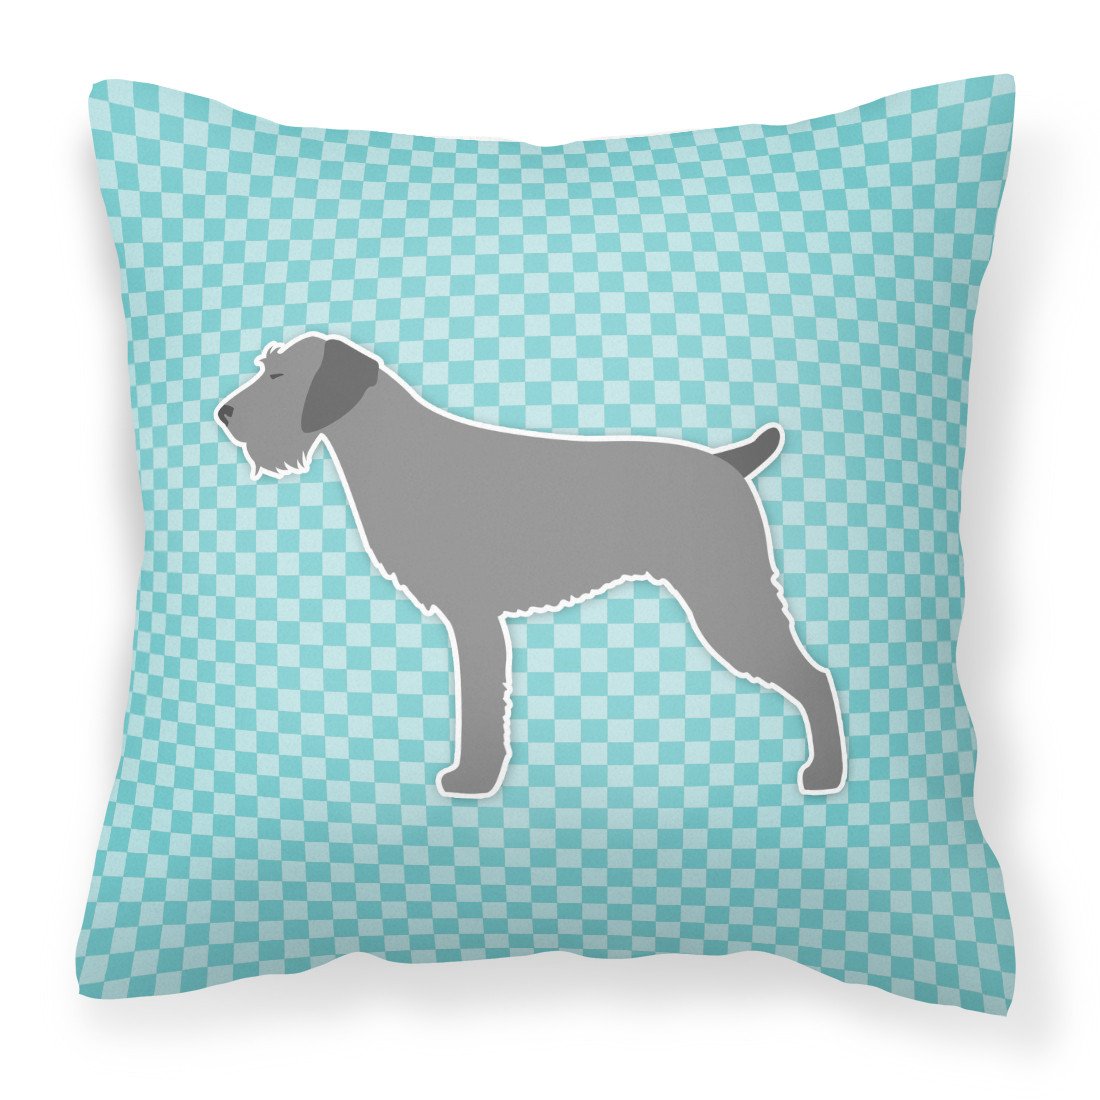 German Wirehaired Pointer Checkerboard Blue Fabric Decorative Pillow BB3711PW1818 by Caroline's Treasures